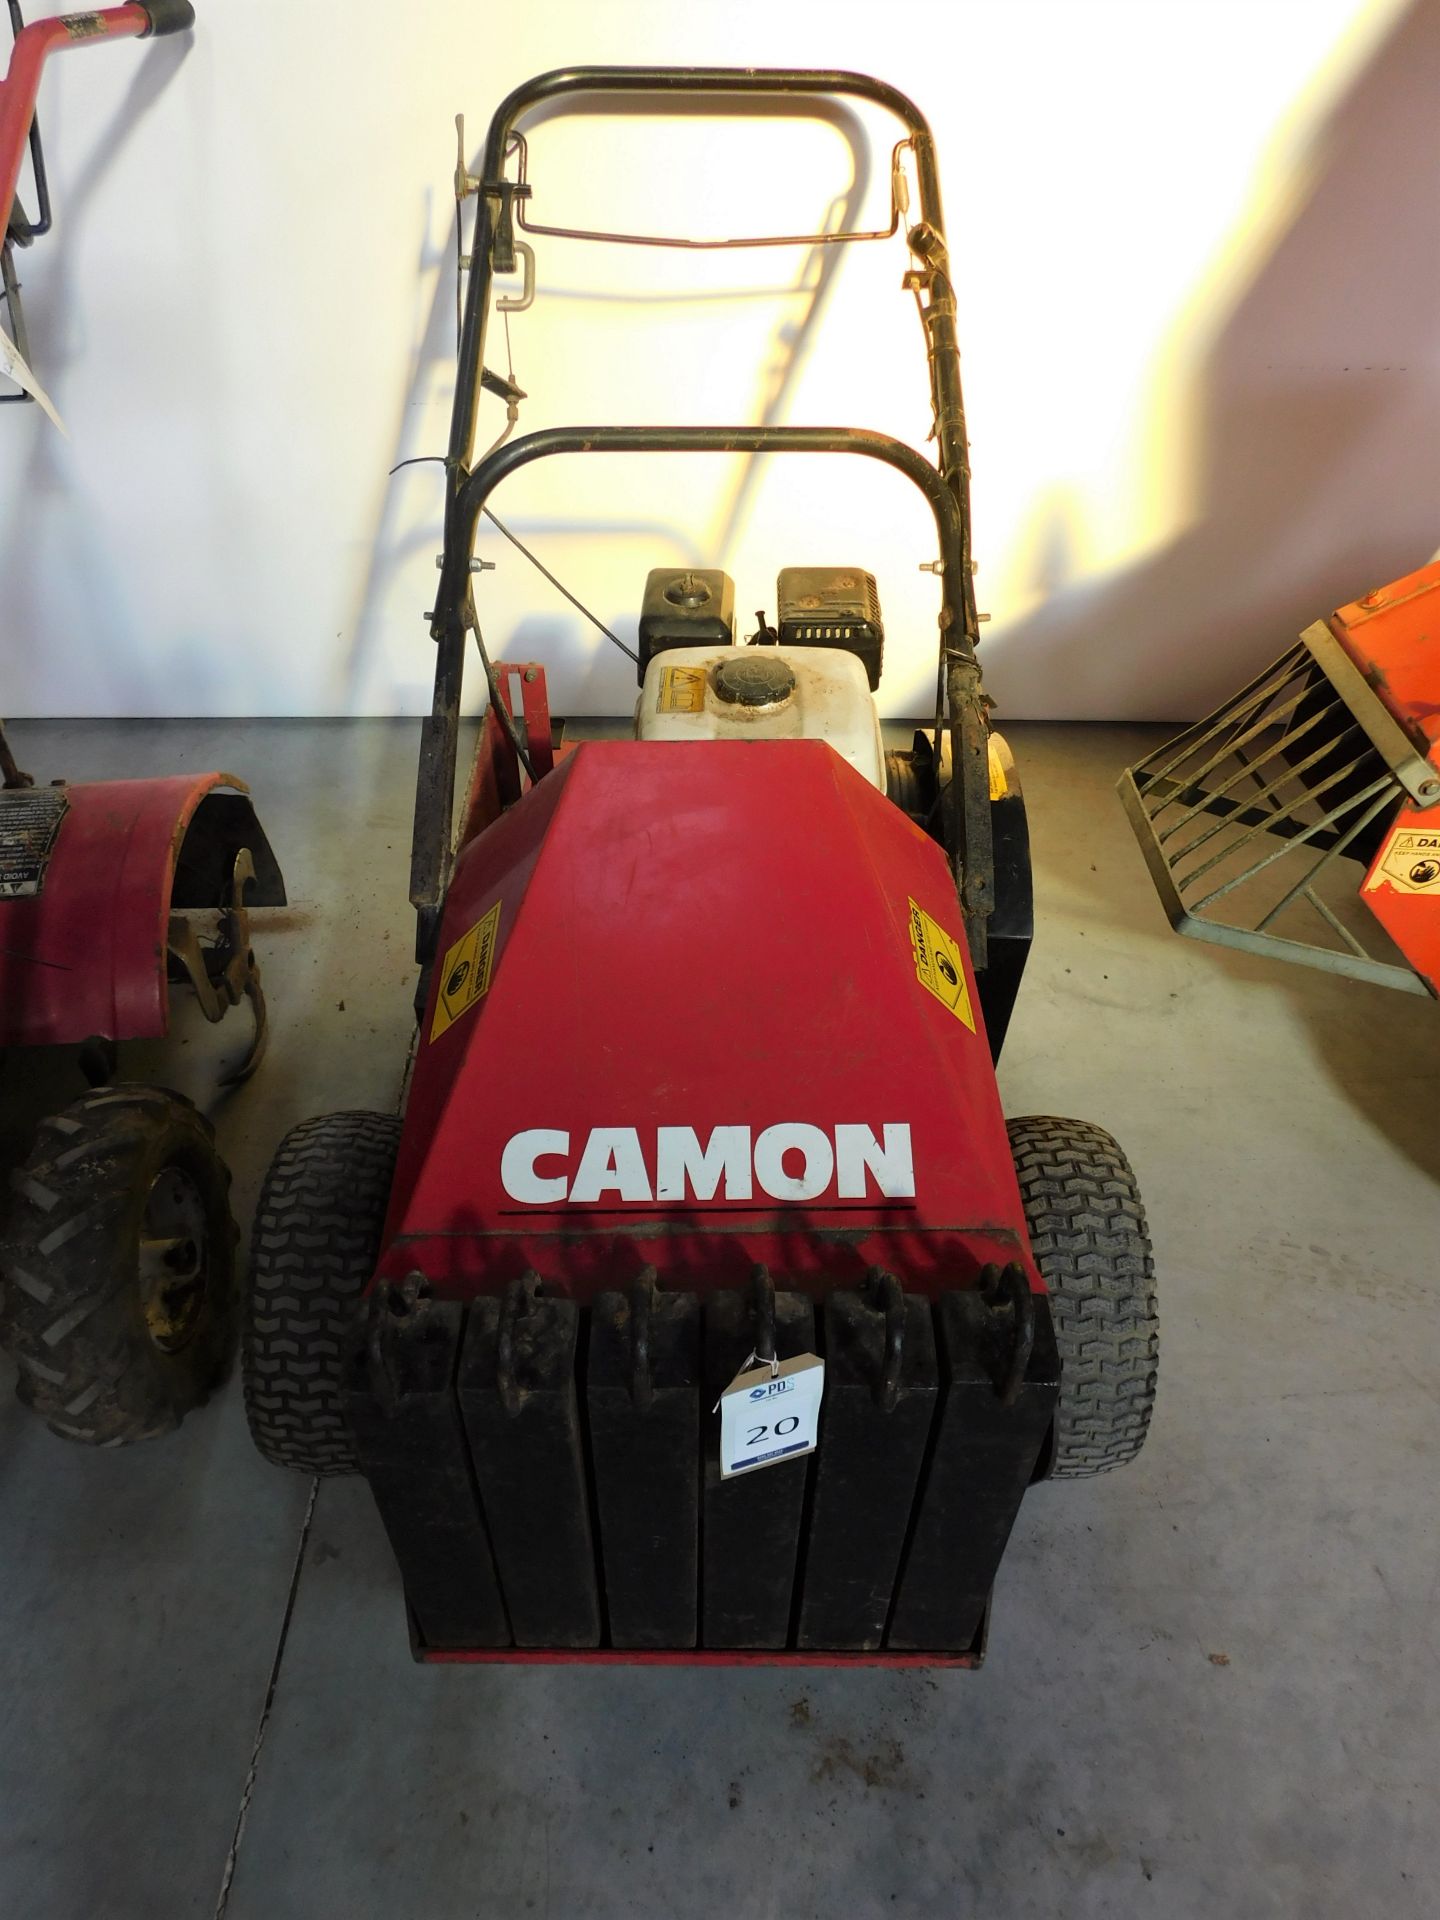 Camon LA 16 Aerator with Honda 5.5 GX160 Engine (Location: Brentwood. Please Refer to General